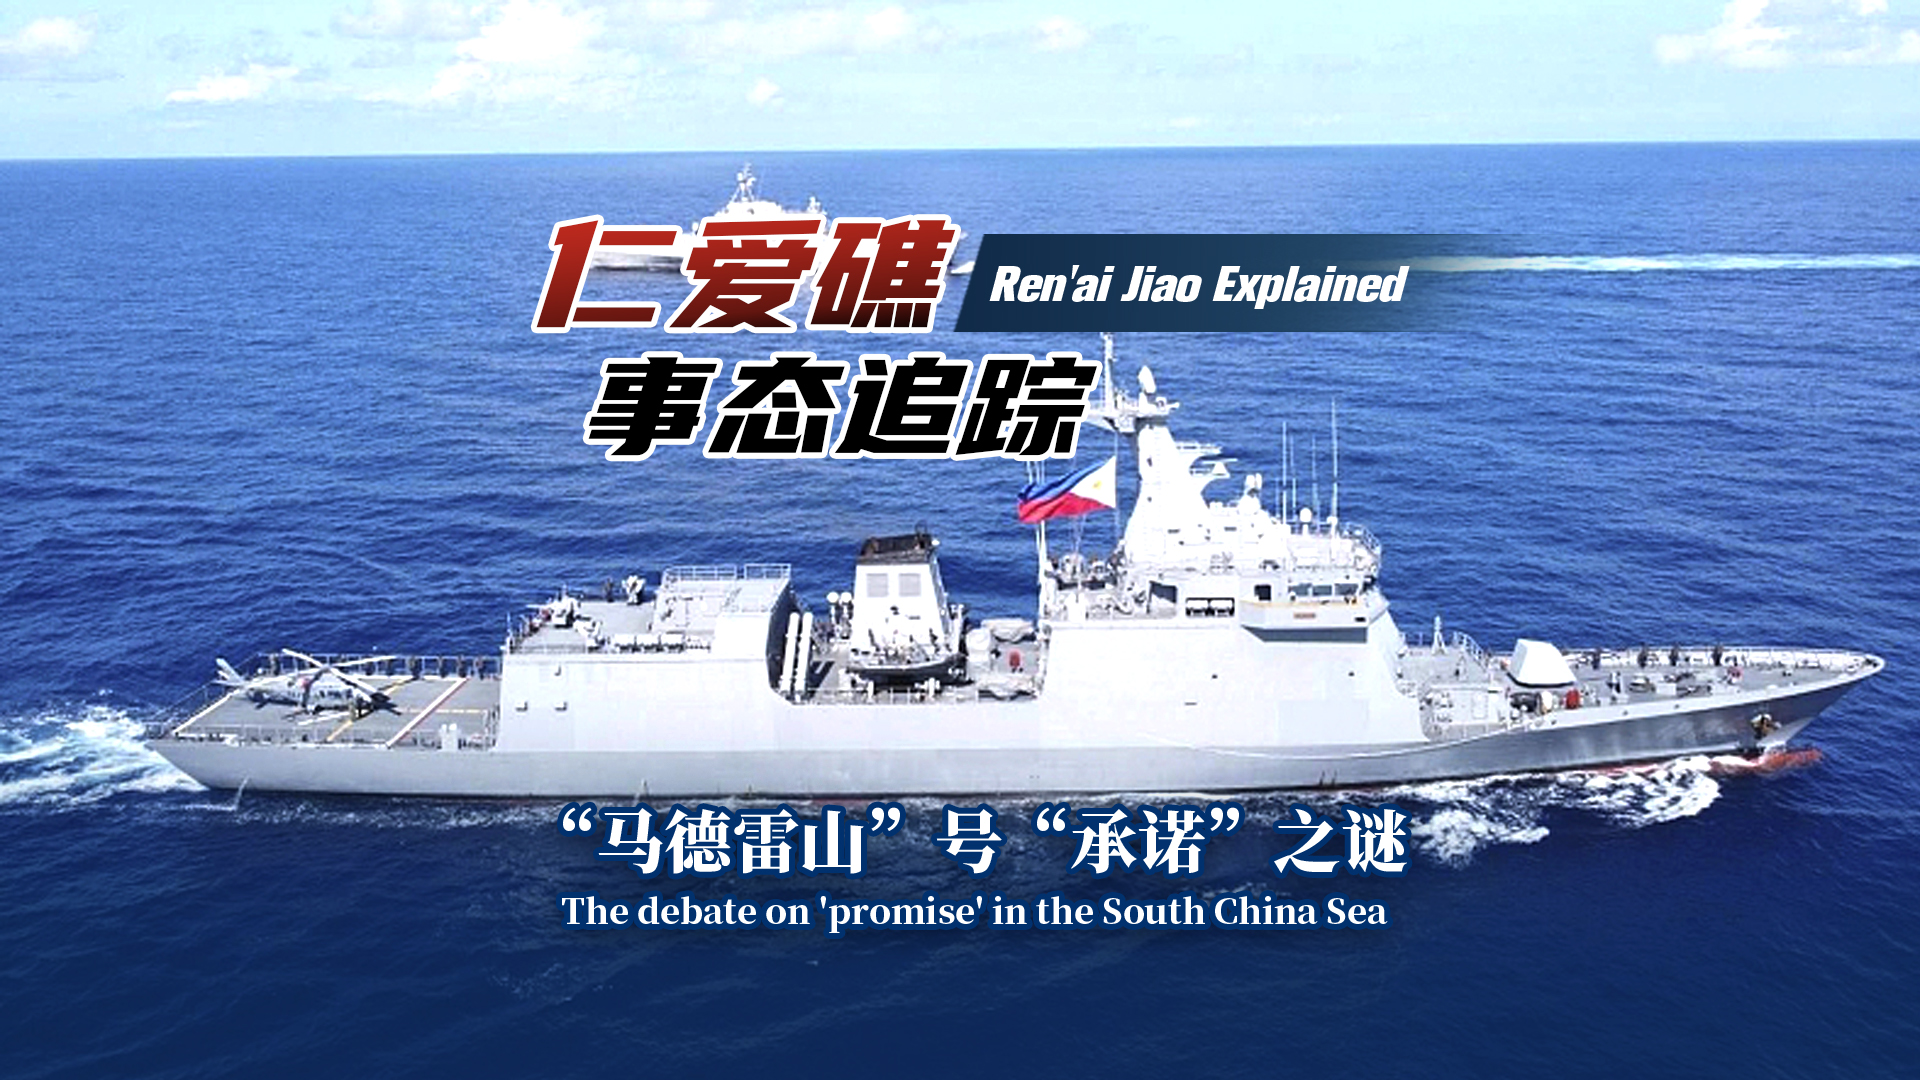 Ren'ai Jiao explained: The debate on 'promise' in the South China Sea